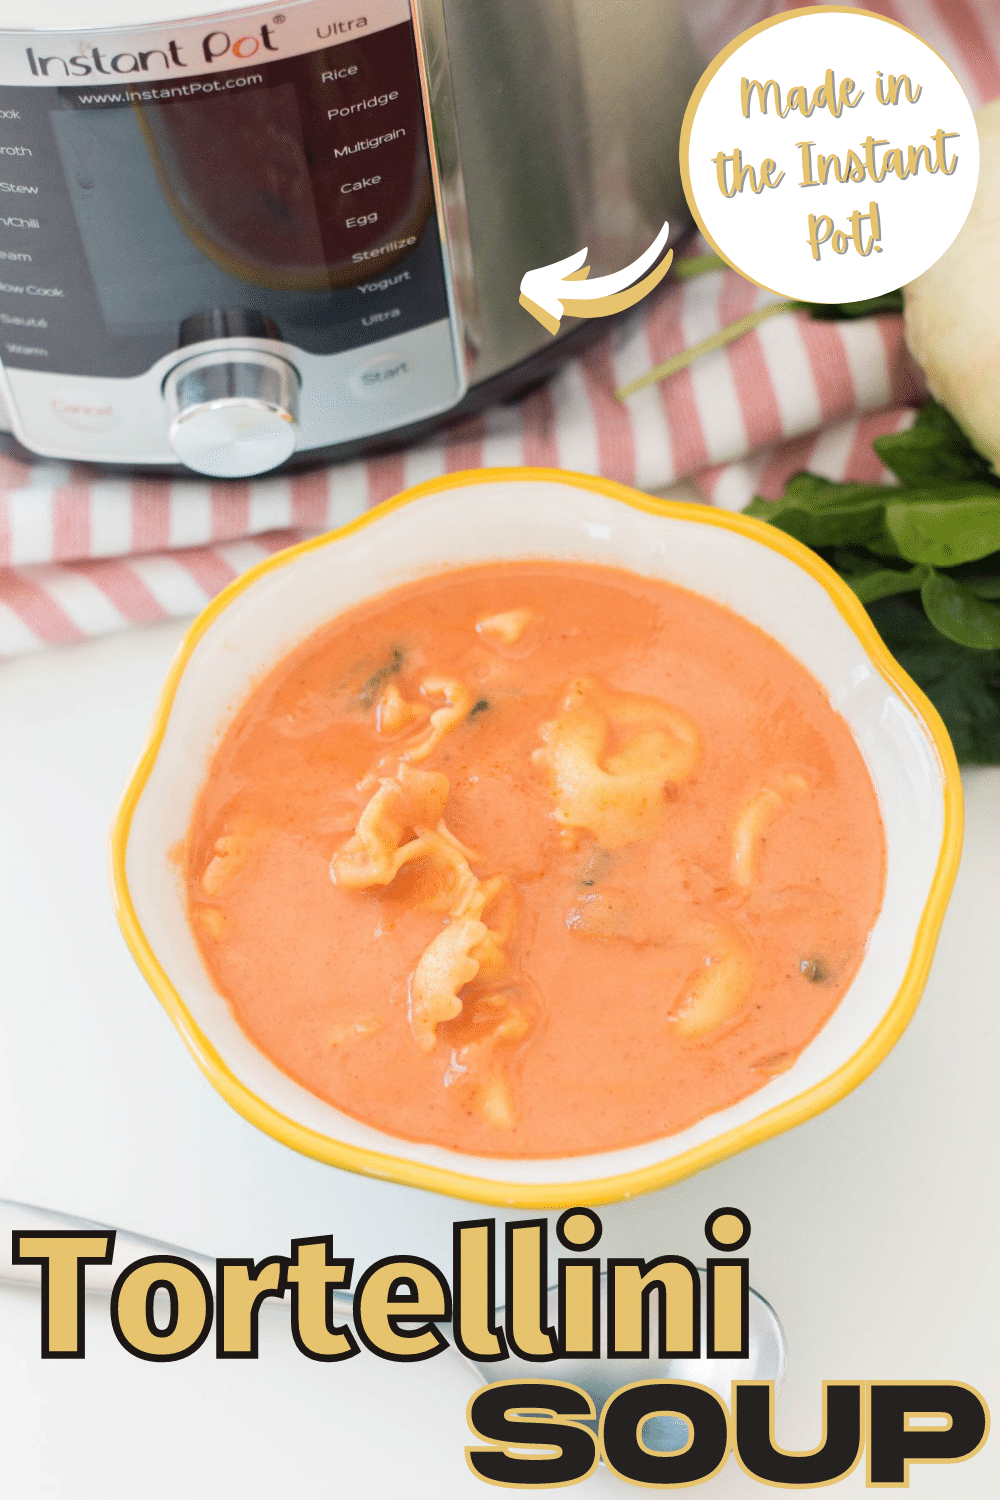 A vertical image of Instant Pot Tortellini Soup in a bowl with a text at the bottom saying "Tortellini Soup" and a text bubble in the upper right with a text saying "Made in the Instant Pot!"